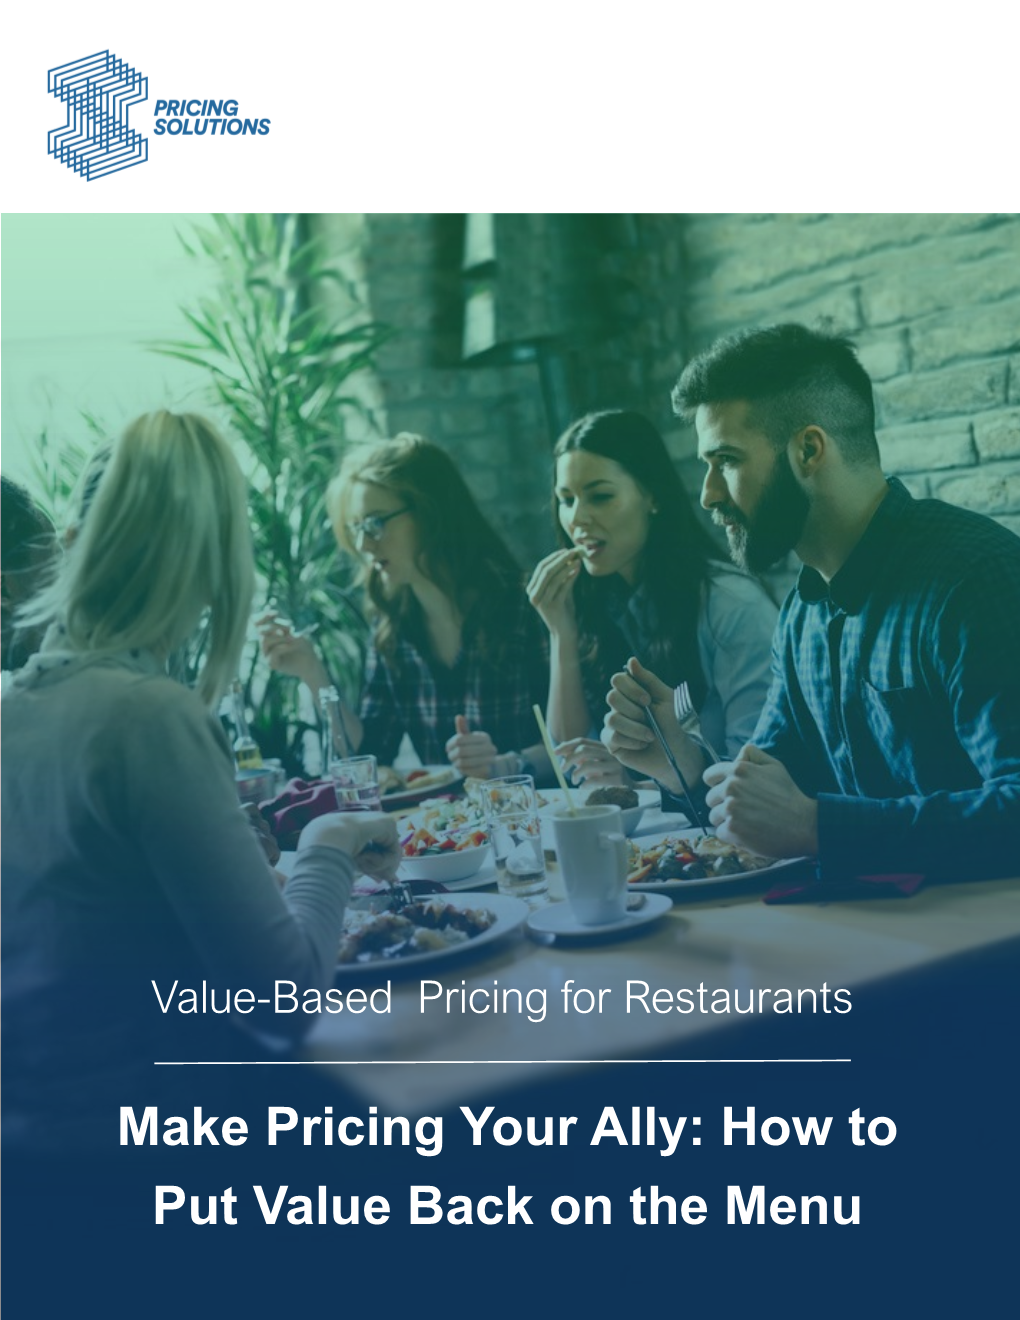 Make Pricing Your Ally: How to Put Value Back on the Menu